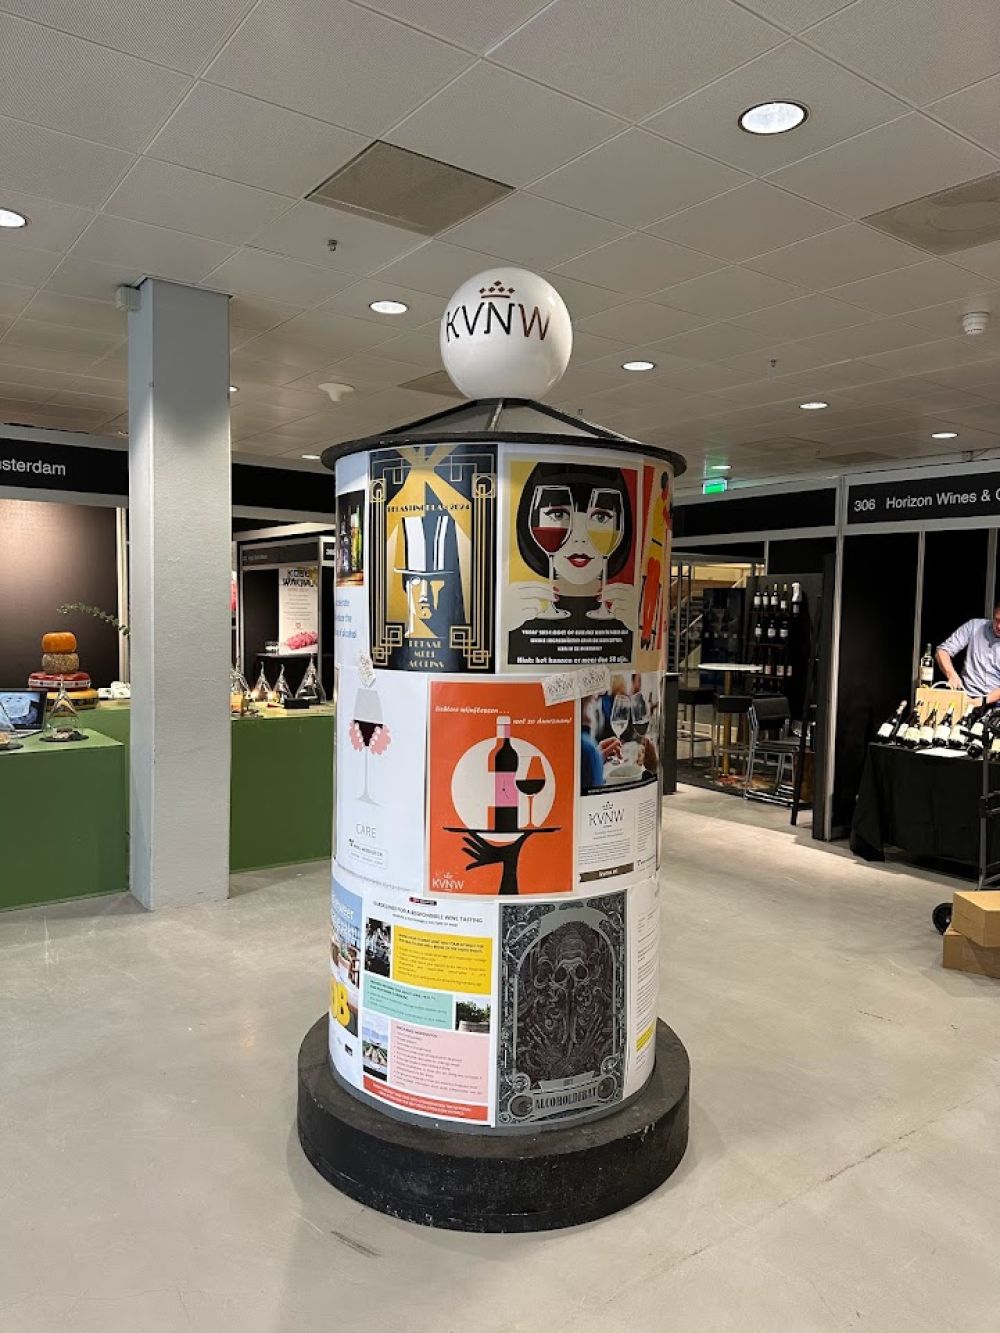 Wine in Moderation’s eye-catching designs steal the show at wine professional fair in Amsterdam 